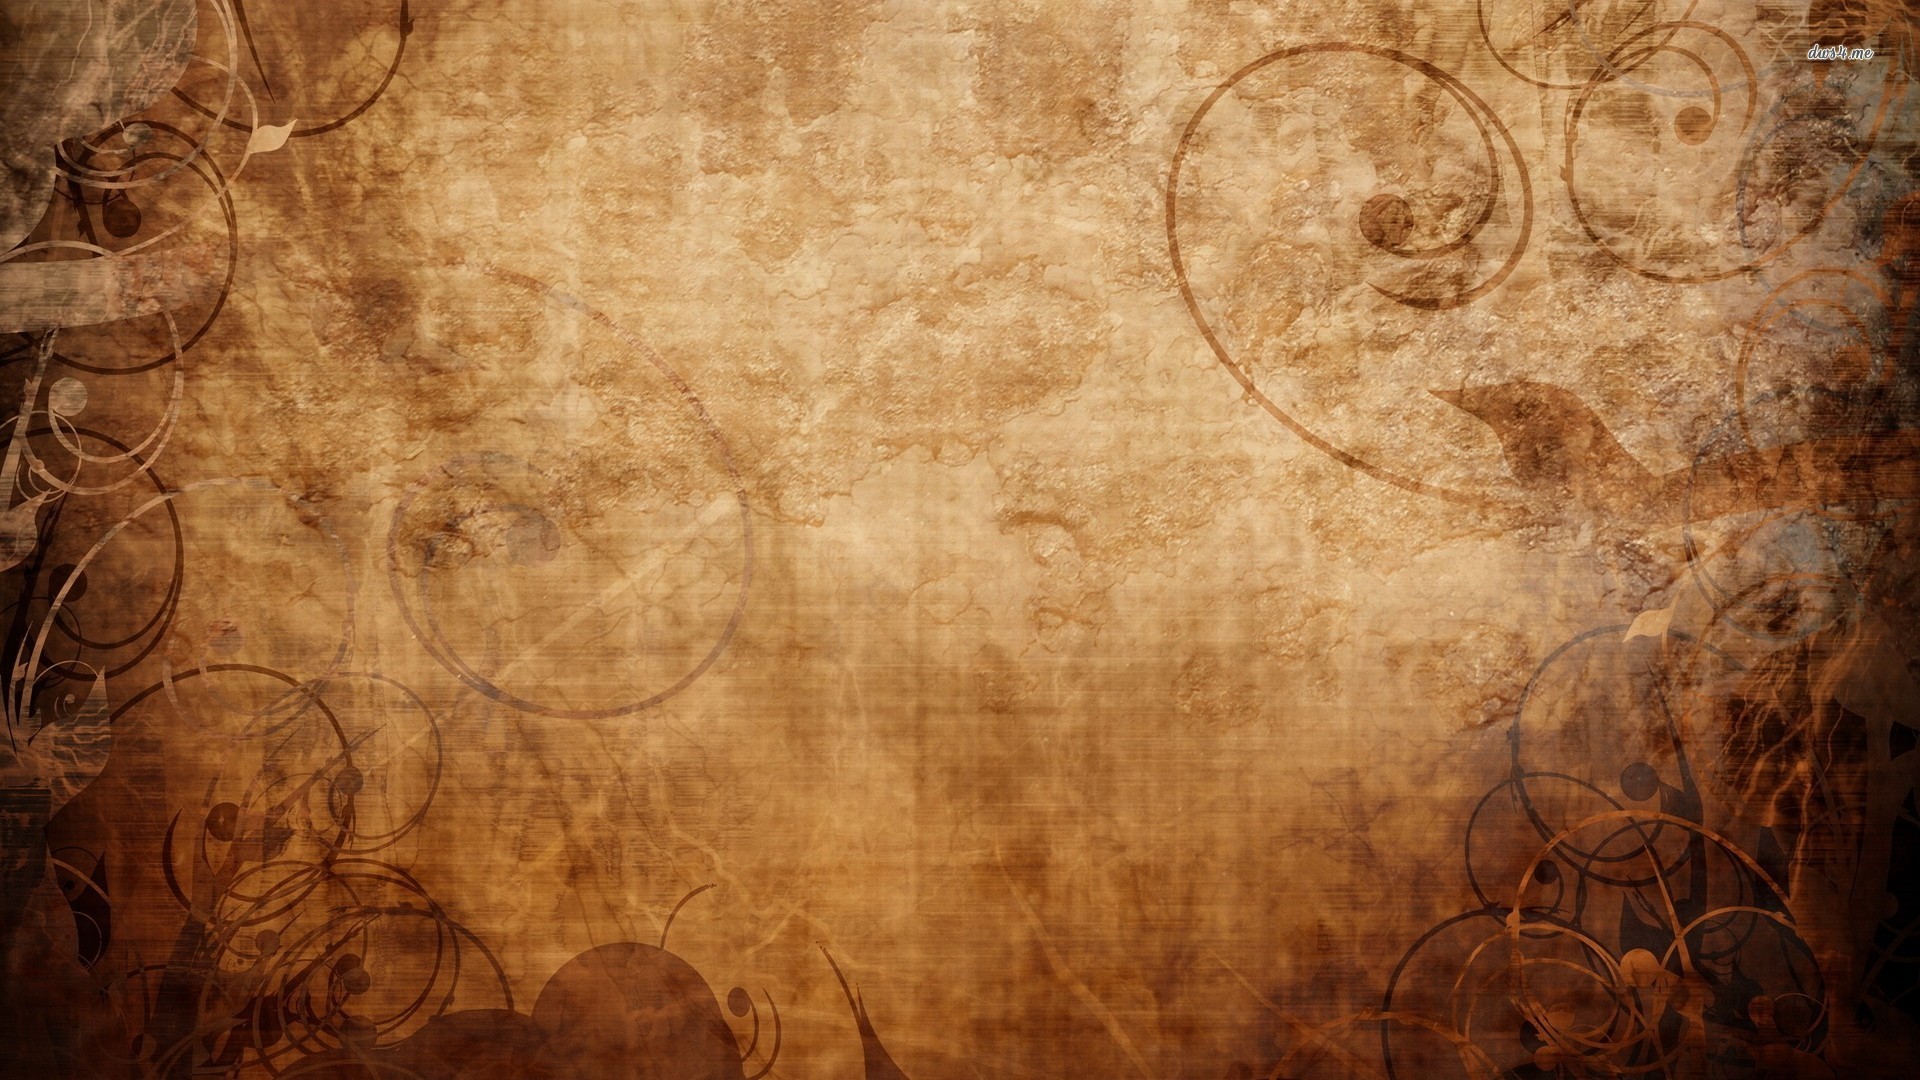 1920x1080 Wallpapers Old Texture World Map On Paper Hd High Definition .